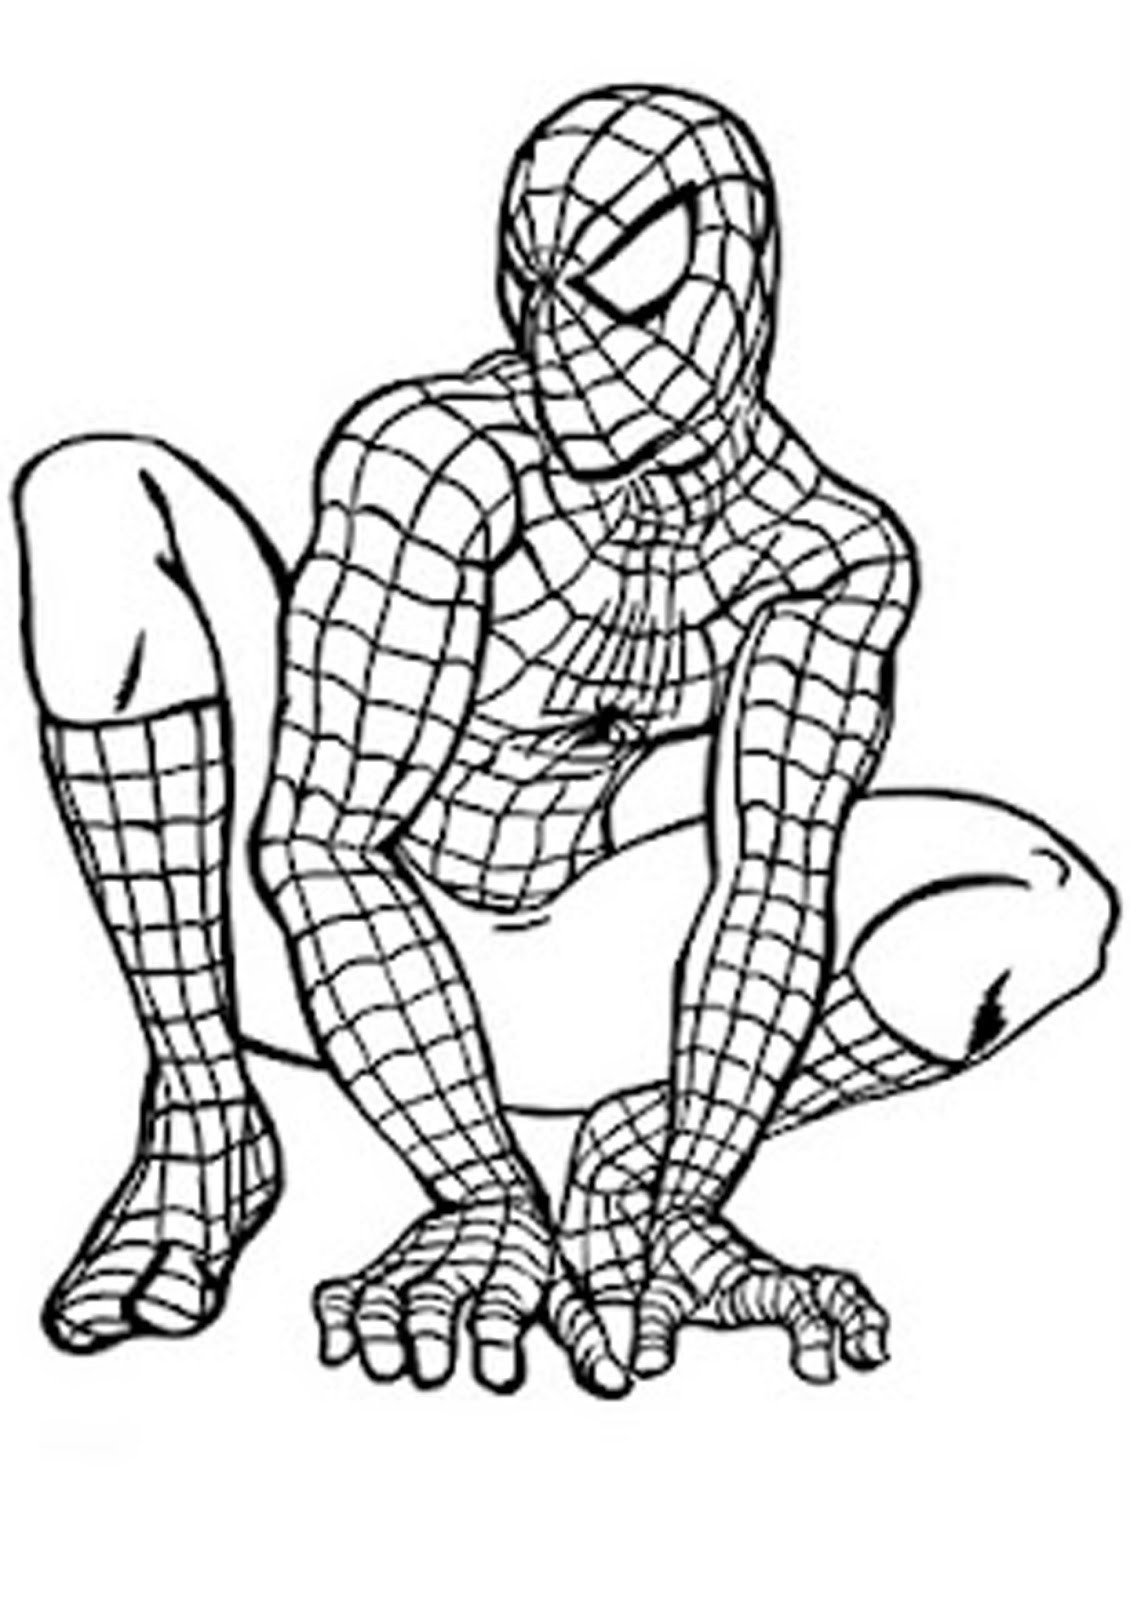 Coloring Sheets For Kids Boys
 Coloring Sheets For Boys Coloring Pages For Kids Coloring